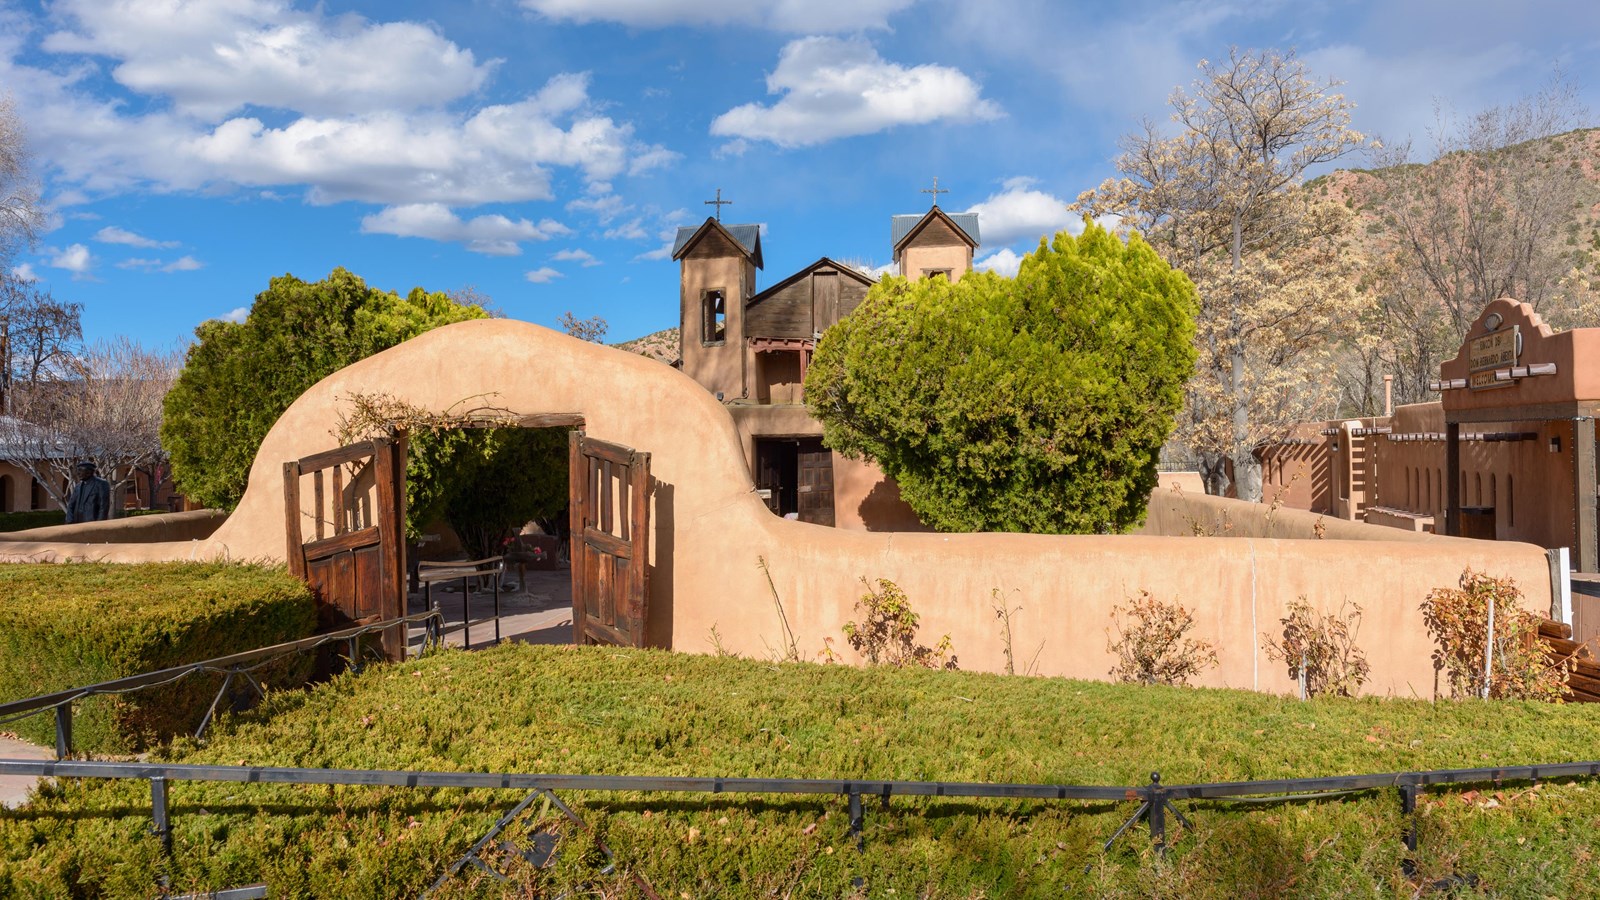 An adobe wall with an open gate, with an adobe church peeking out above the walls.